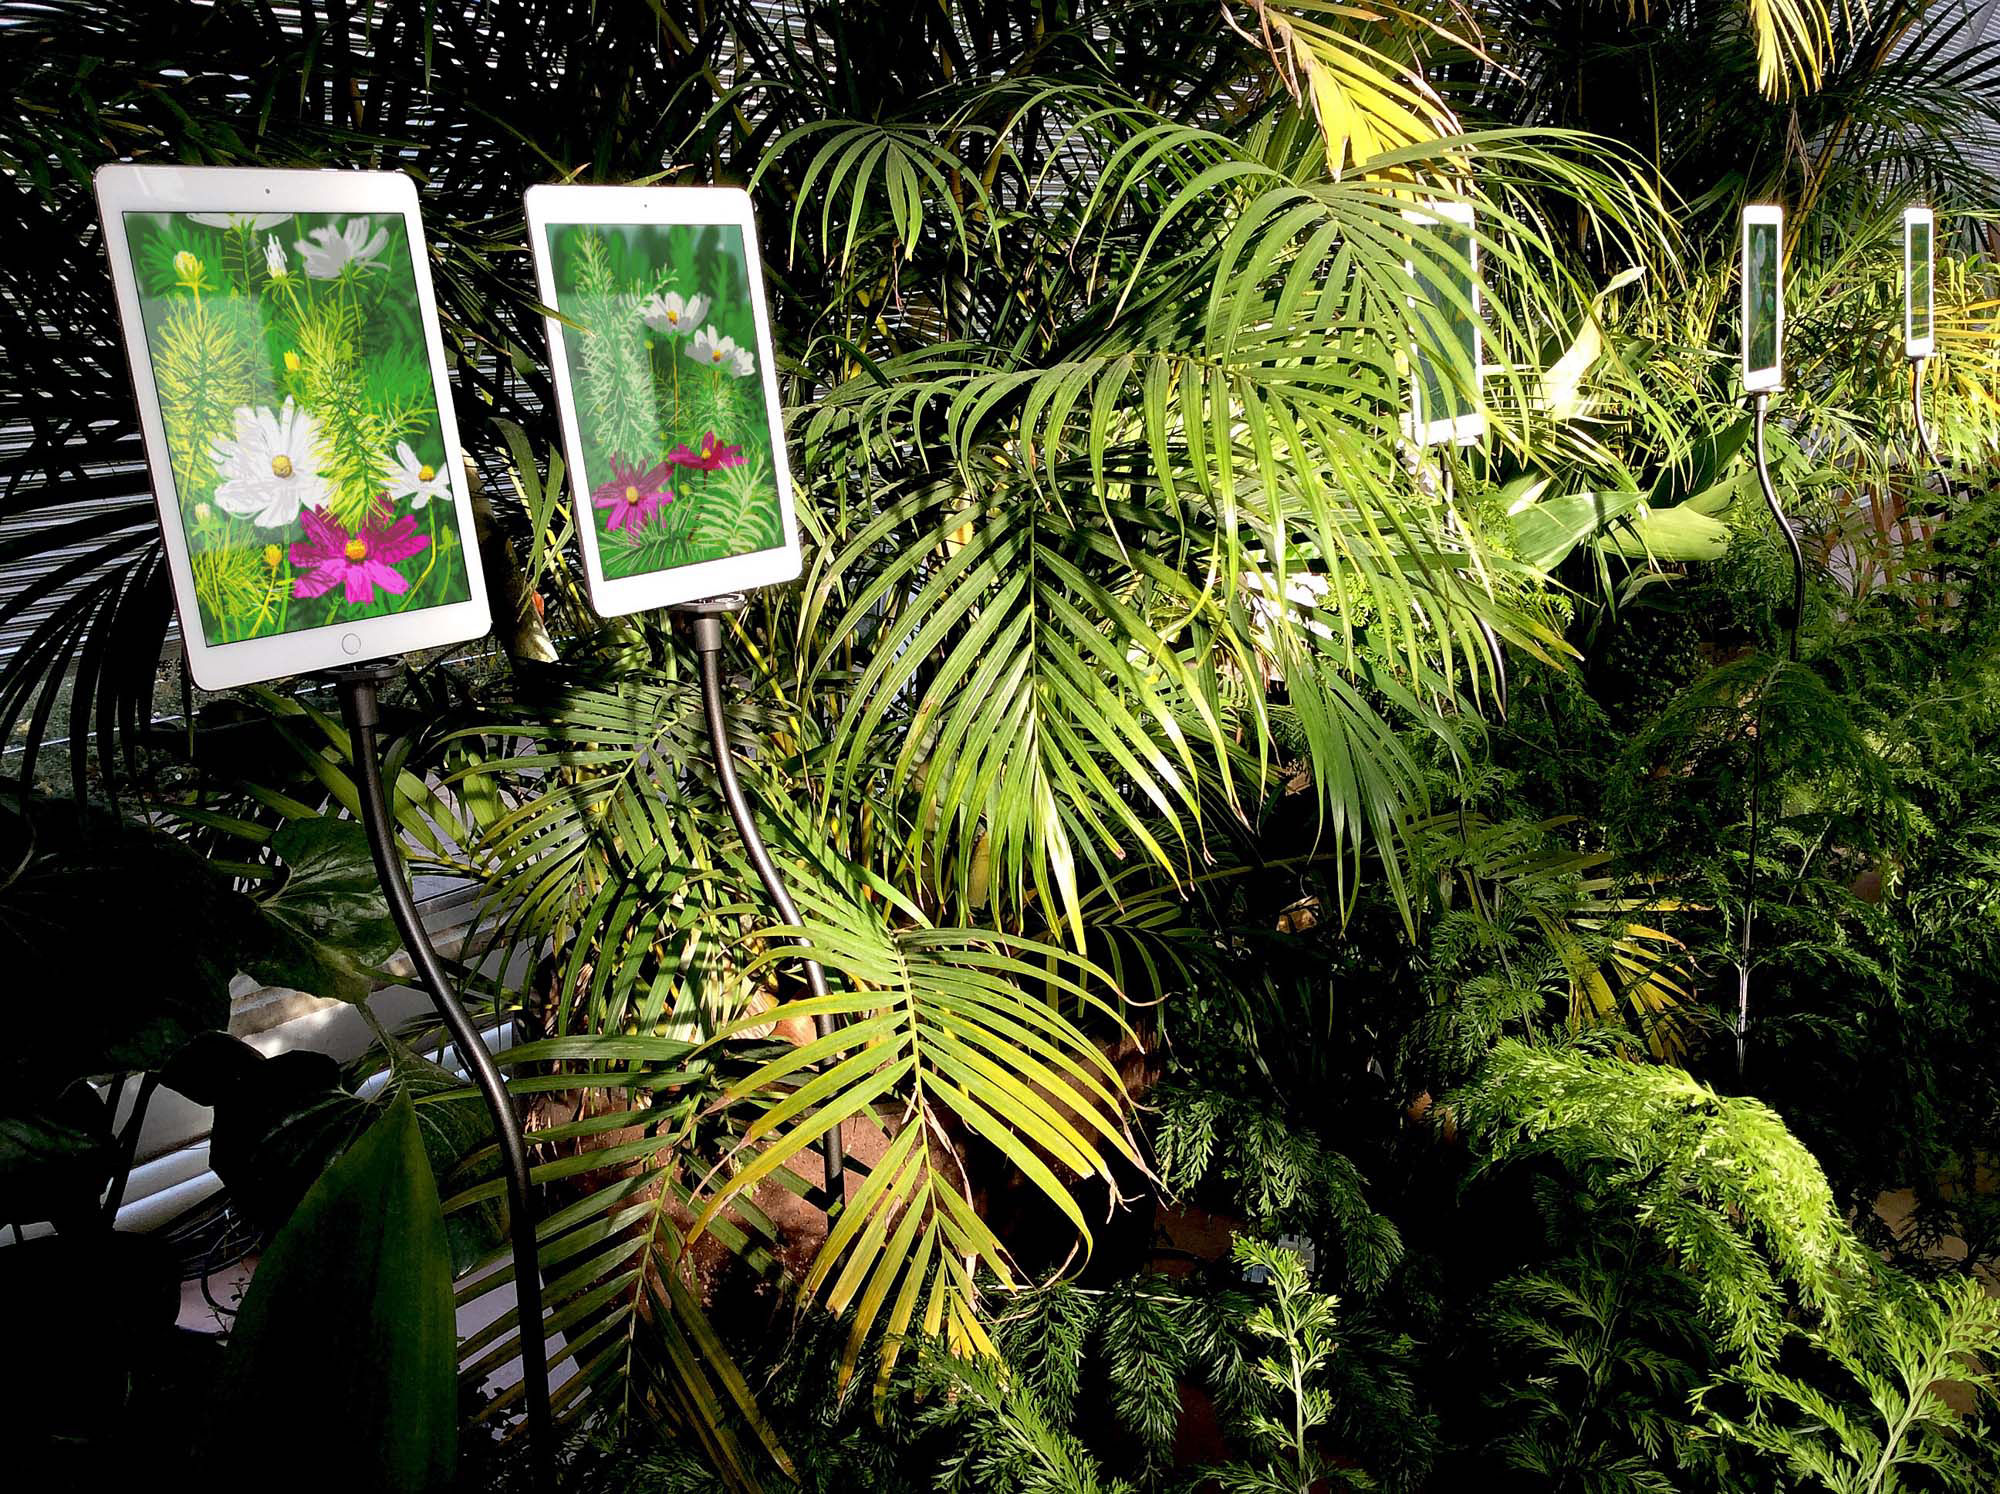 Press Release - Installation. 'Andy Maitland, The Digital Garden® 2019, animated iPad drawings, Royal Horticultural Society Garden, Wisley, UK'.